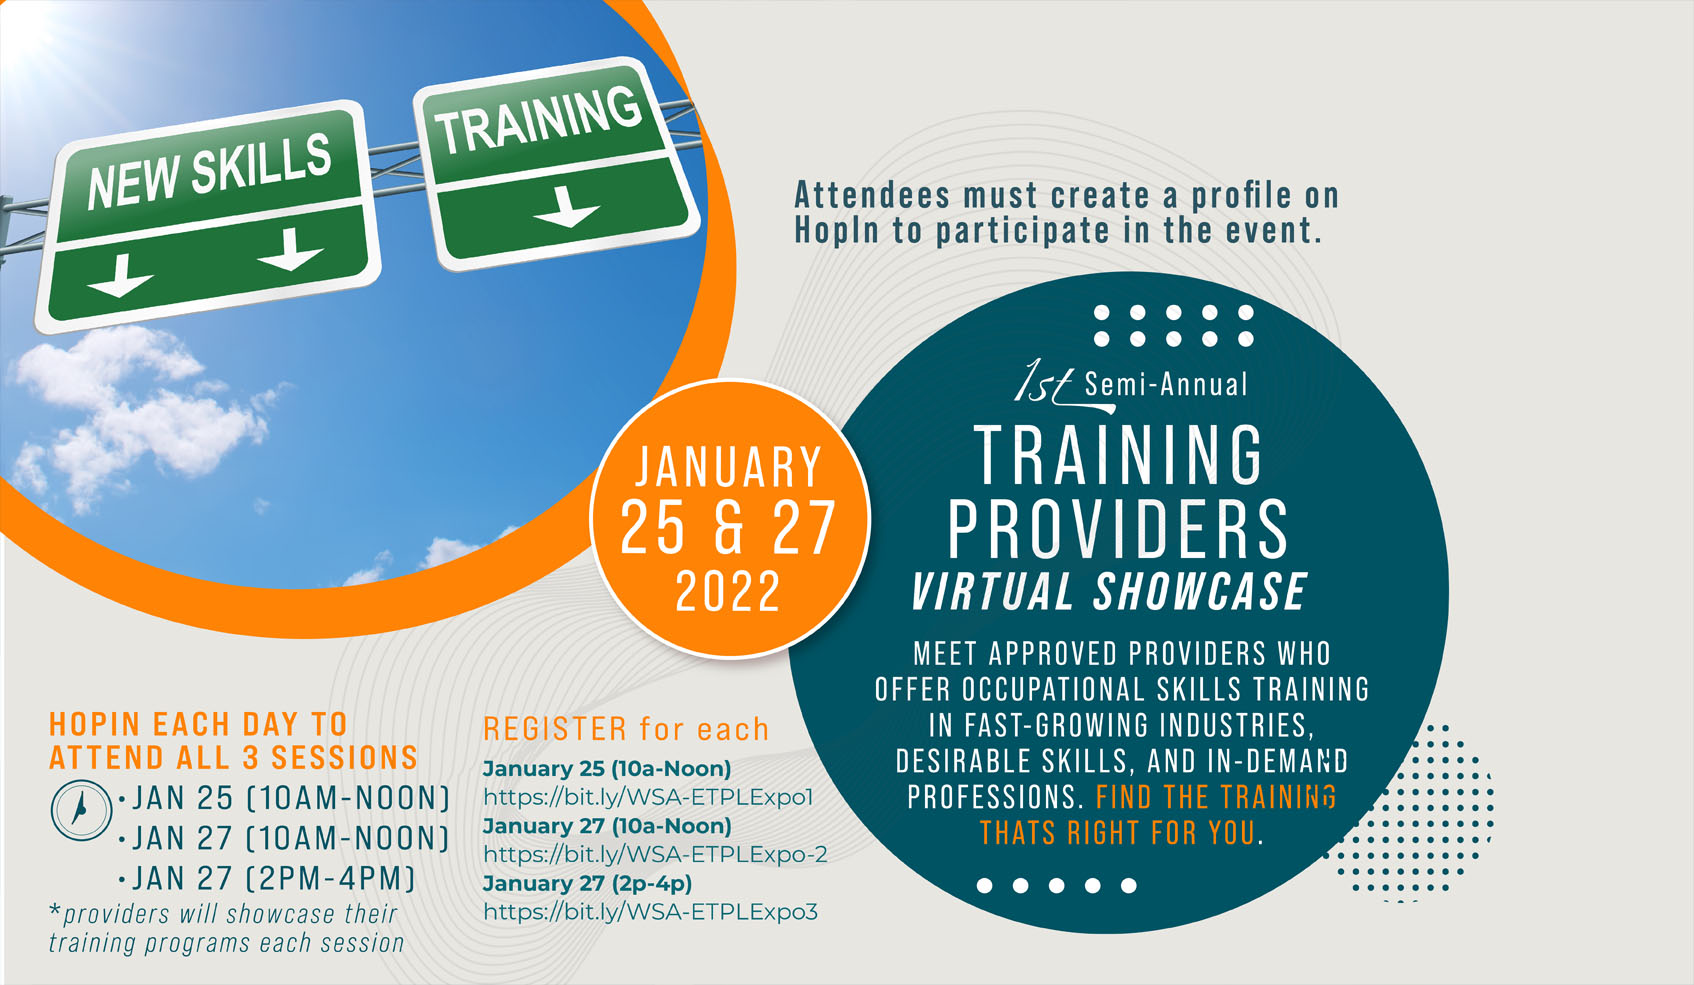 1st Semi-Anual Training Provider Showcase. Register to attend all three training provider showcases. Click the link to go to registration.